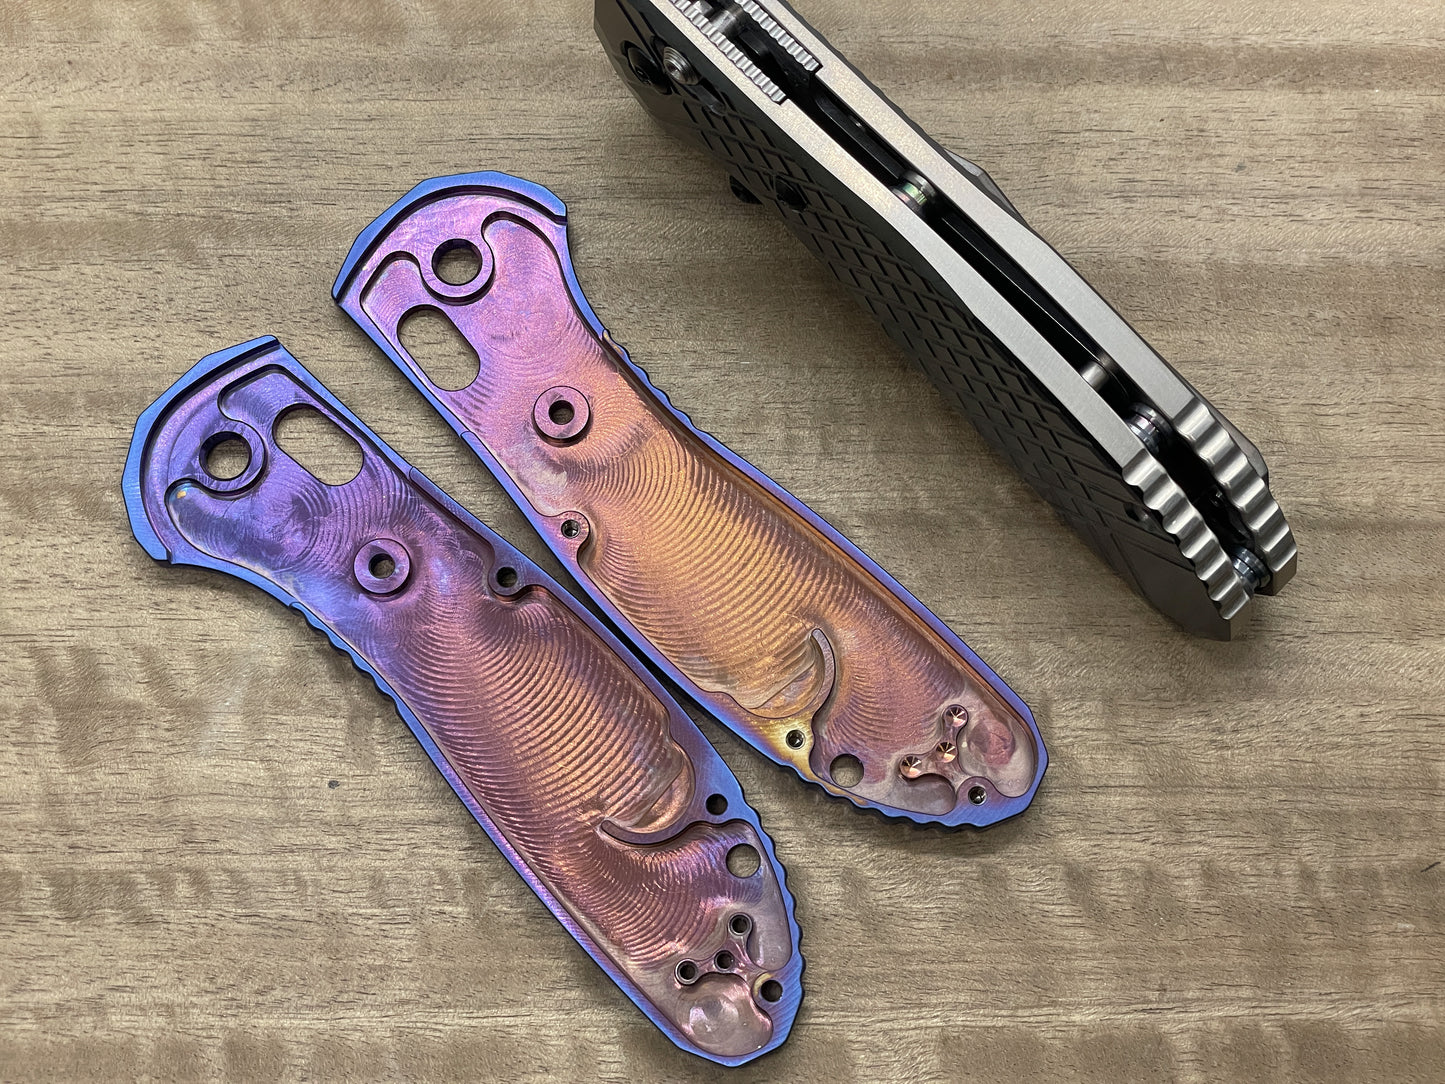 FRAG milled BLUE Ano Titanium Scales for Benchmade GRIPTILIAN 551 & 550